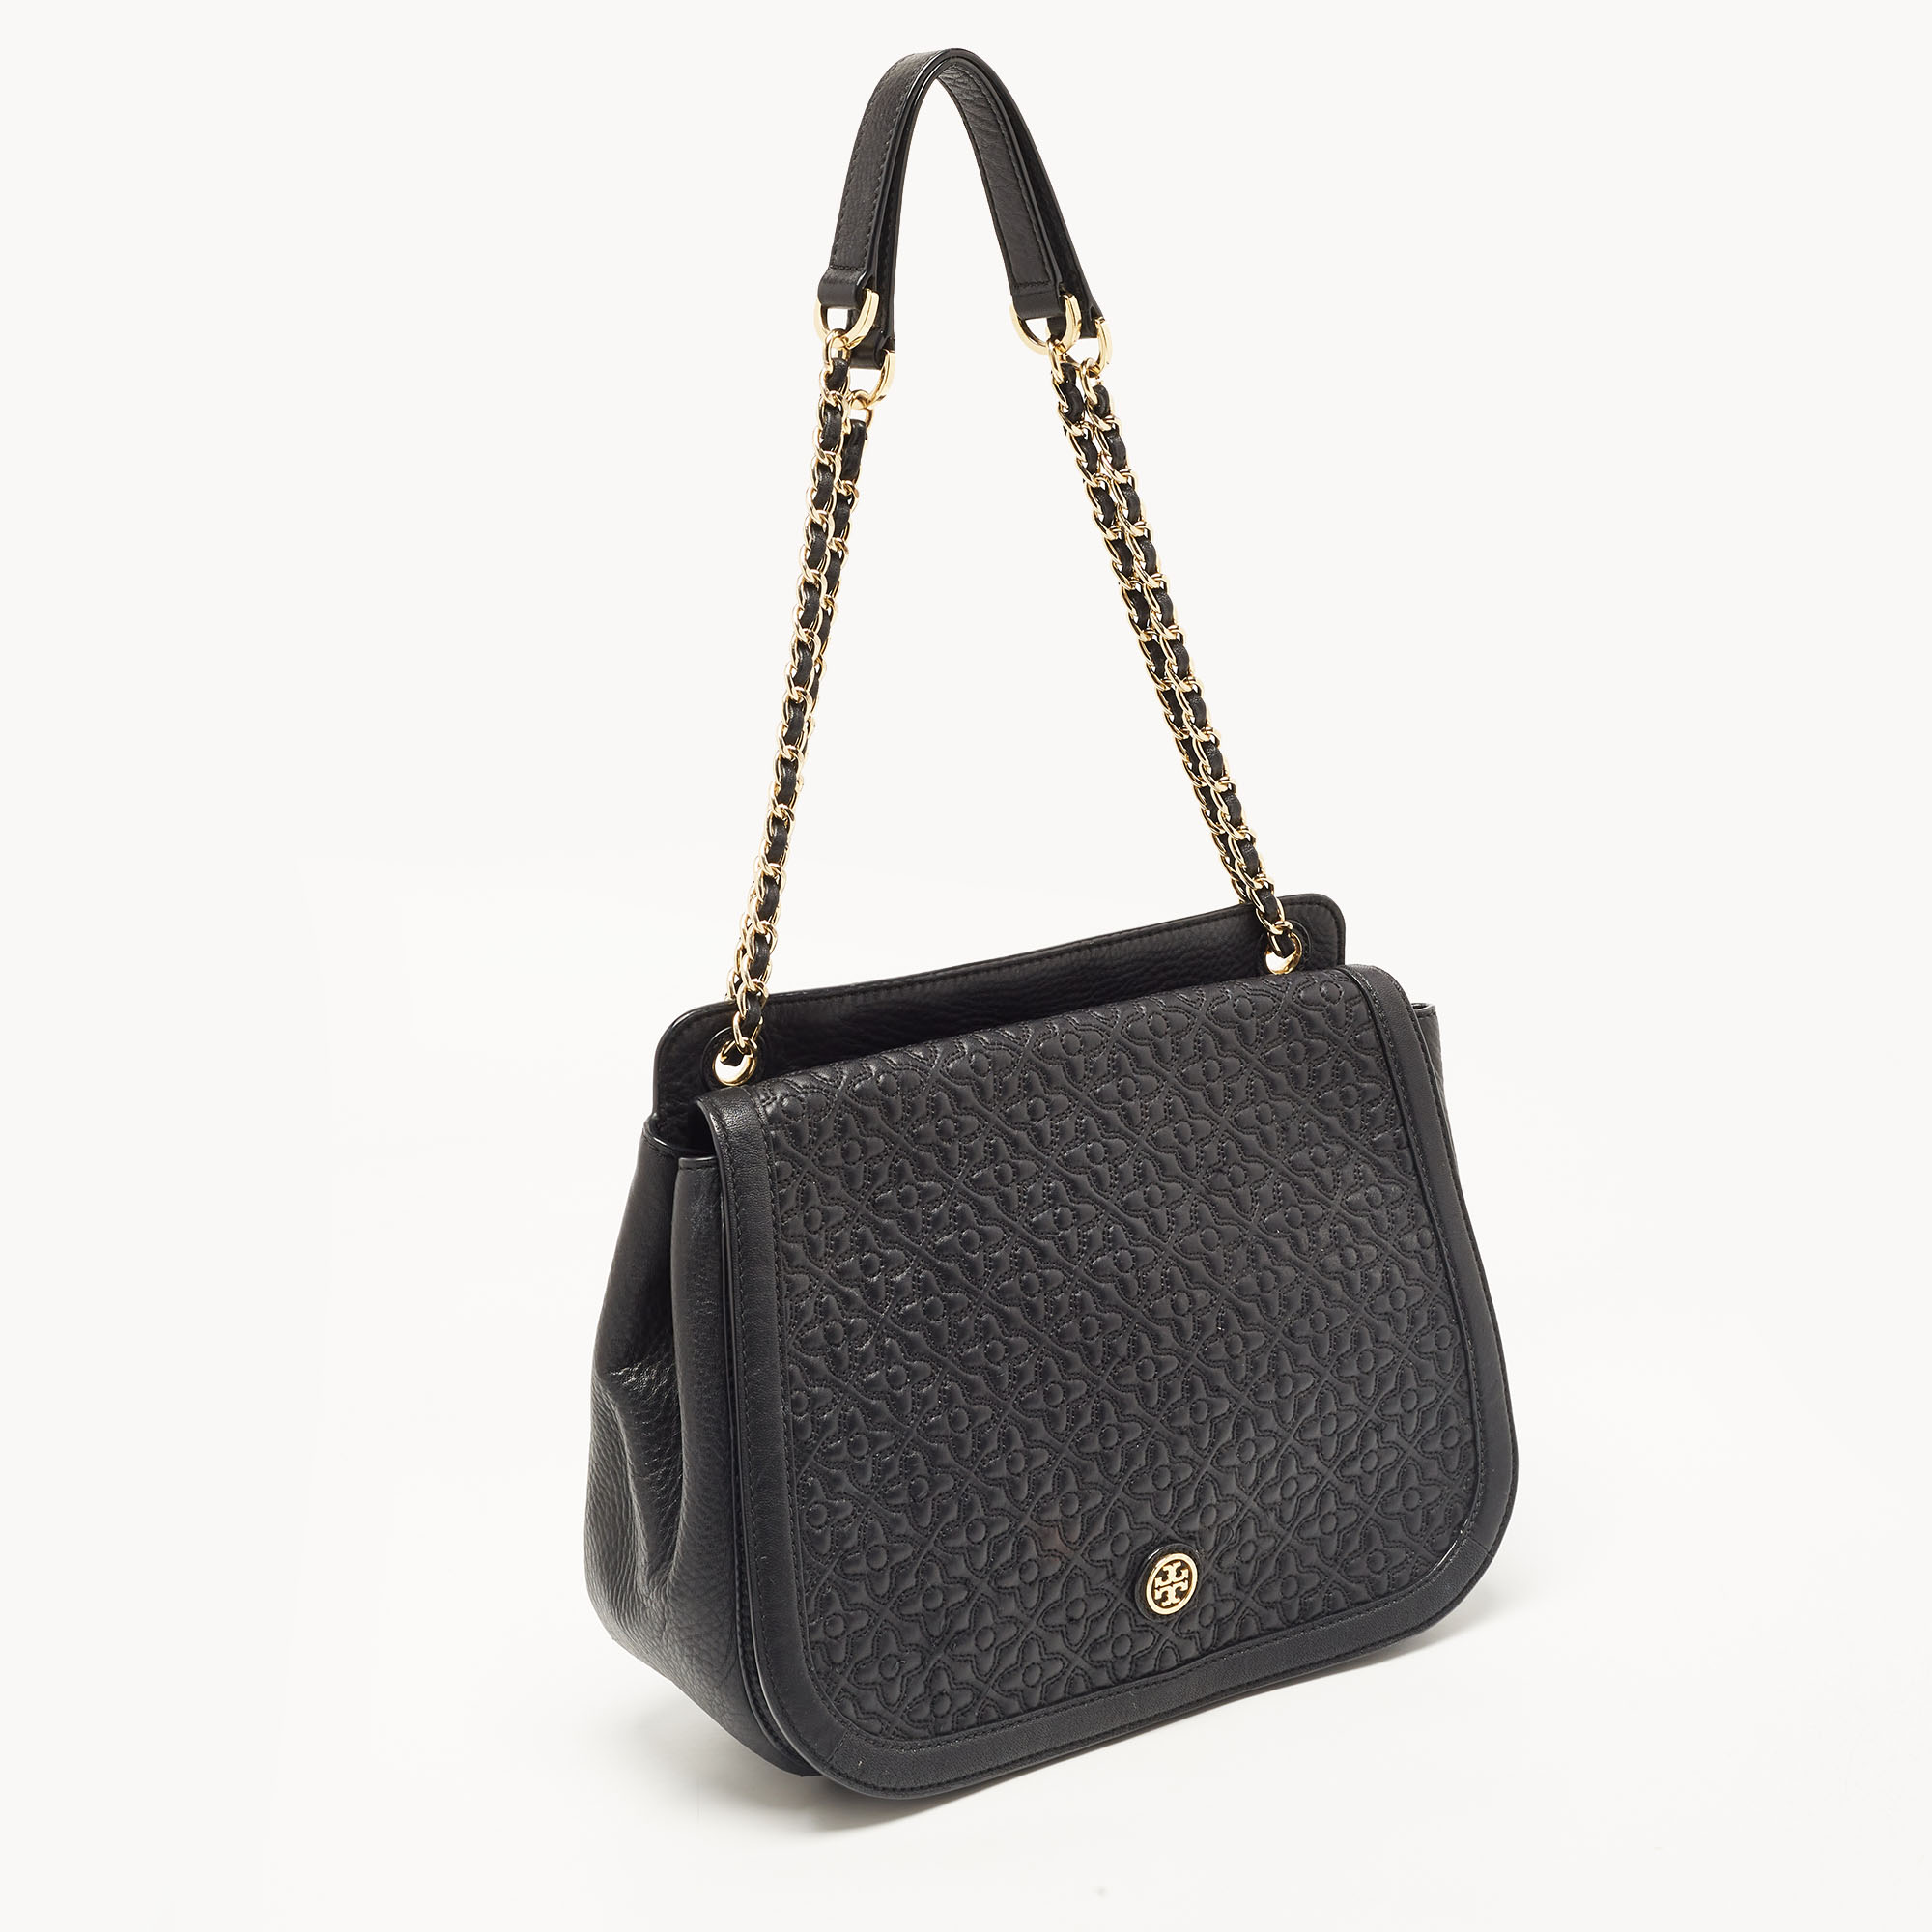 Tory Burch Black Quilted Leather Bryant Shoulder Bag